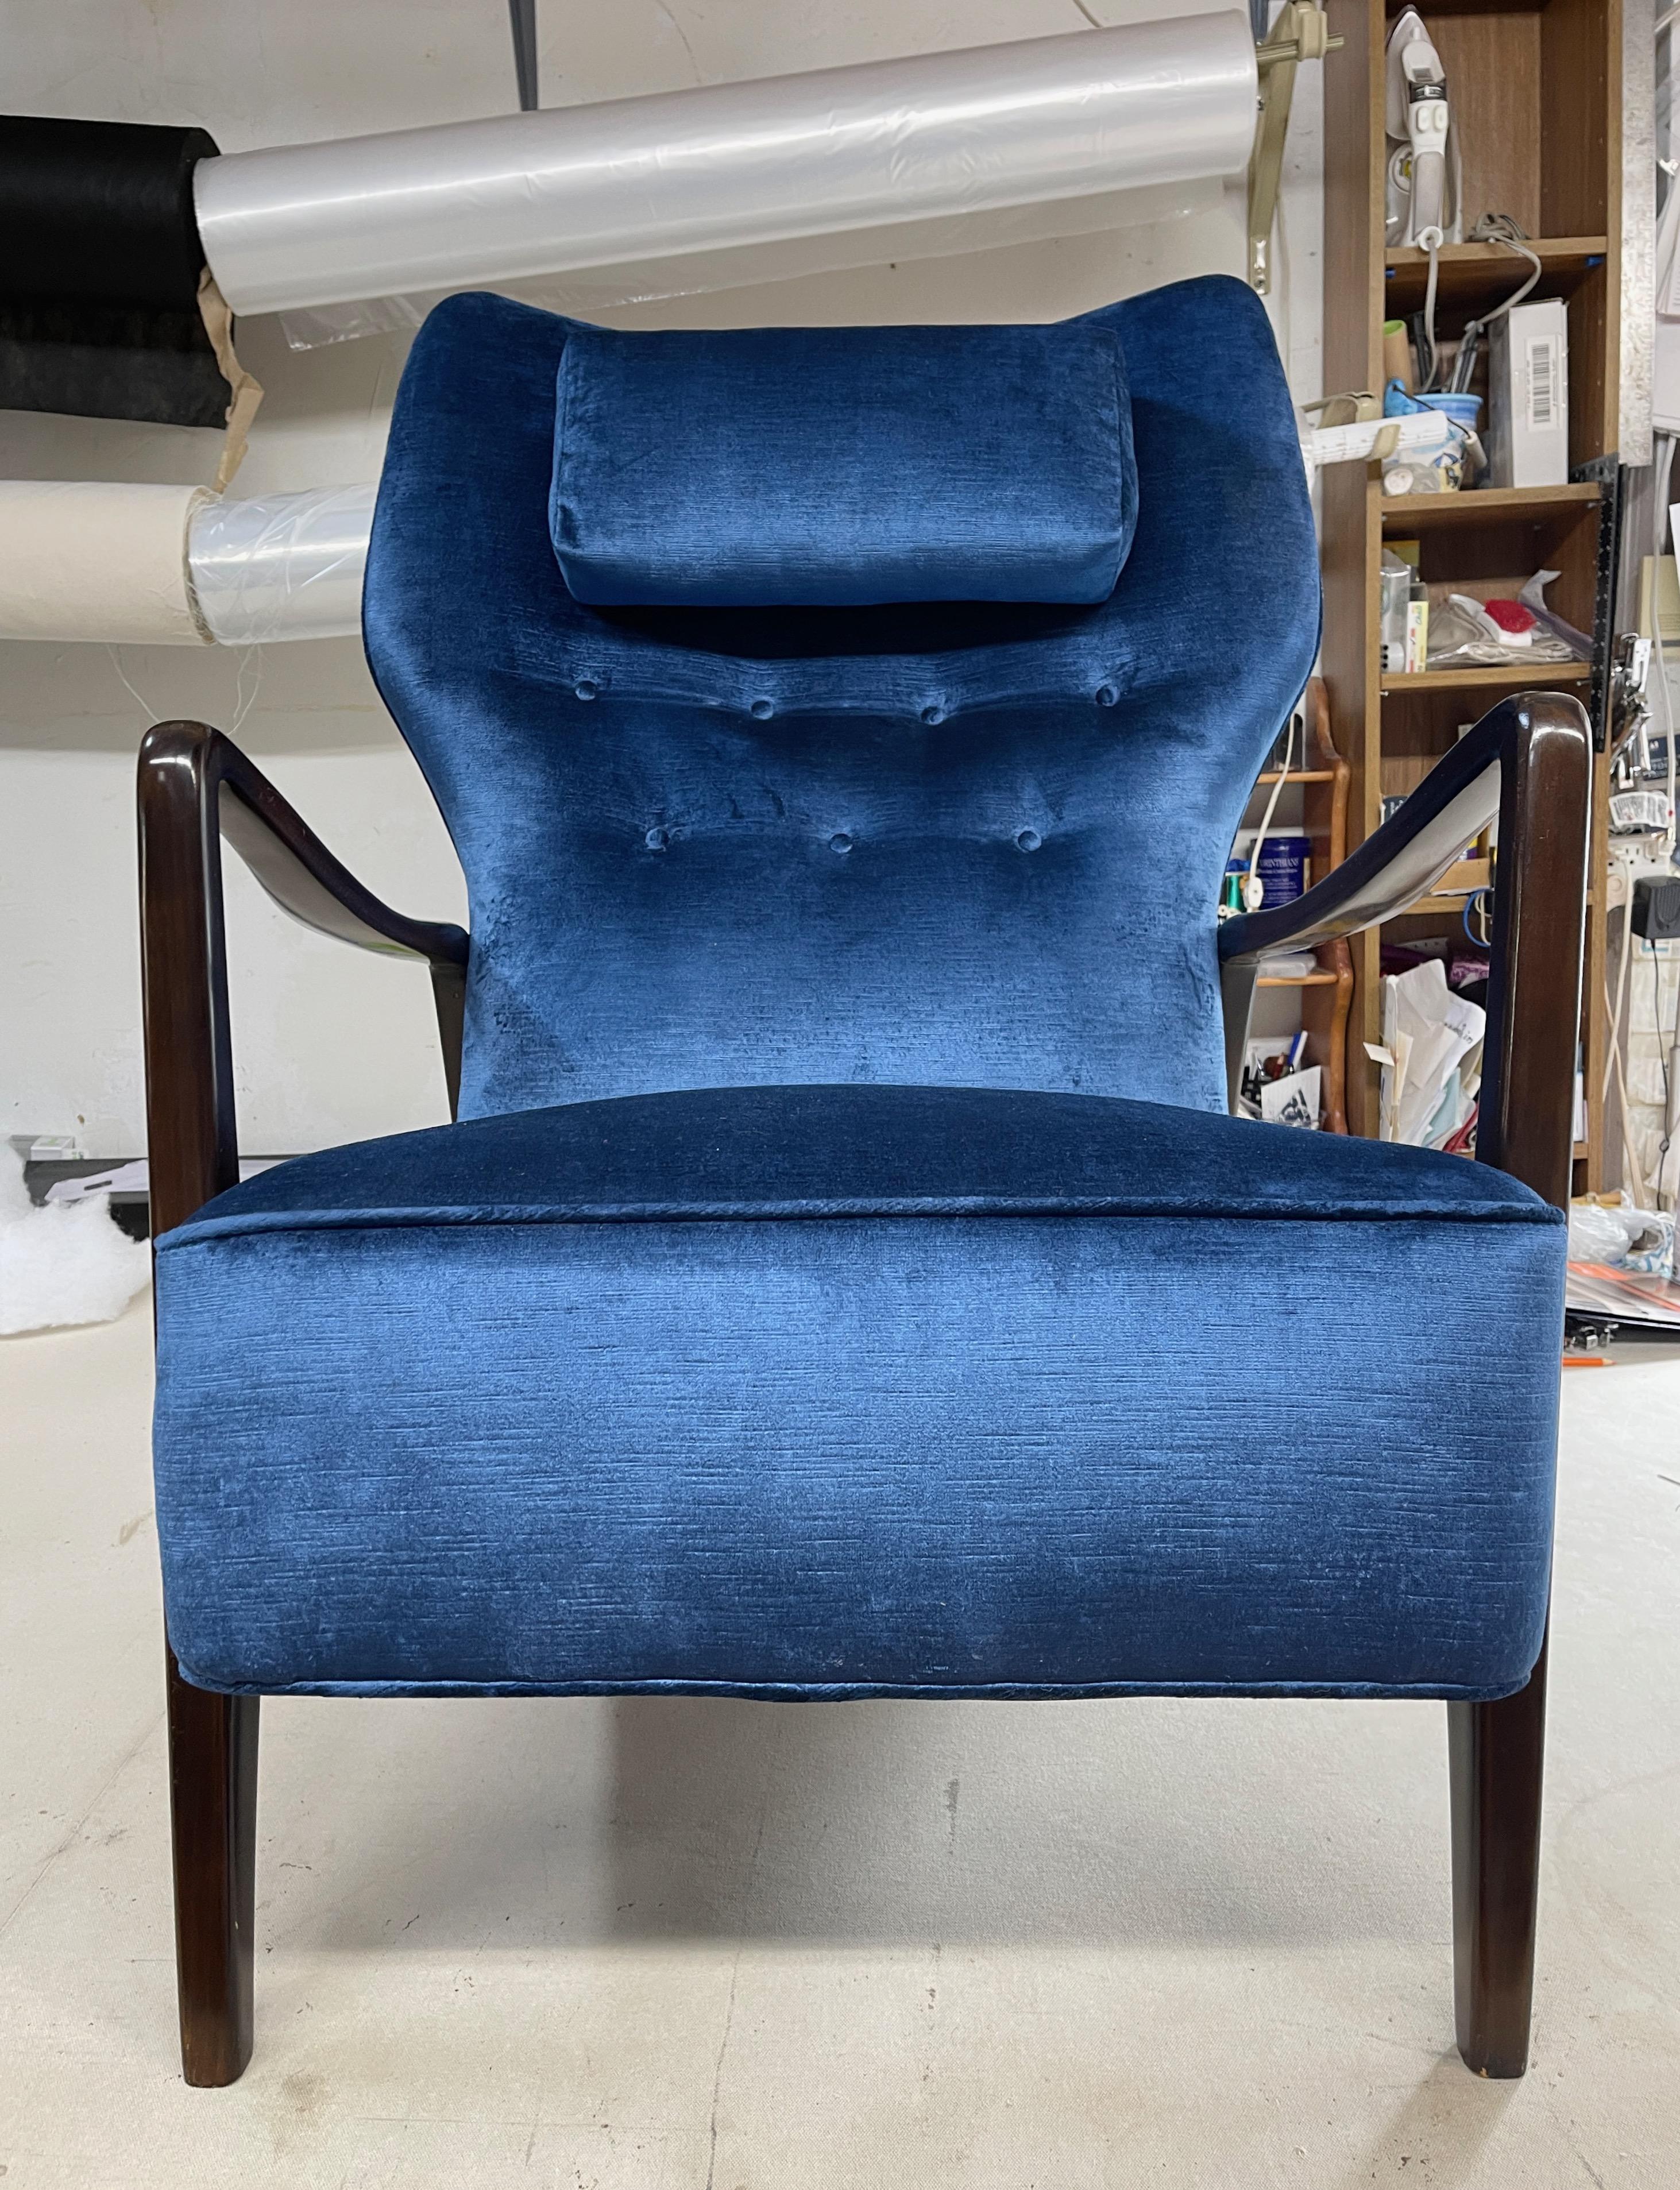 Duxello wingback lounge chair designed by Folke Ohlsson for DUX of Sweden. This was one of his early designs, dating to 1955. The wings have such a dramatic profile along with the tidy rows of buttons and colossal seat cushion give this chair its